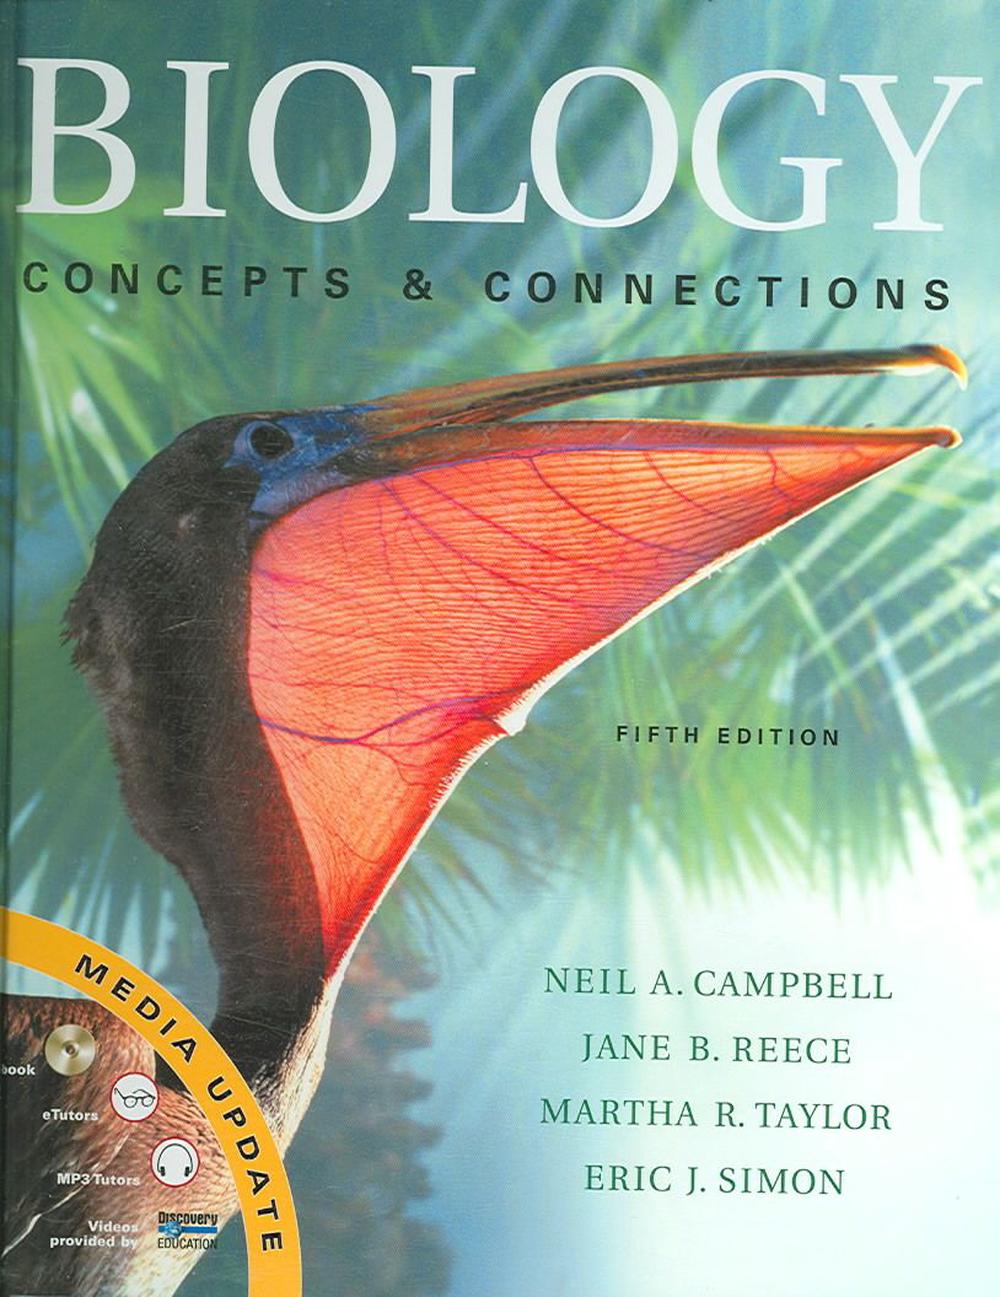 biology-concepts-and-connections-with-cdrom-by-neil-a-campbell